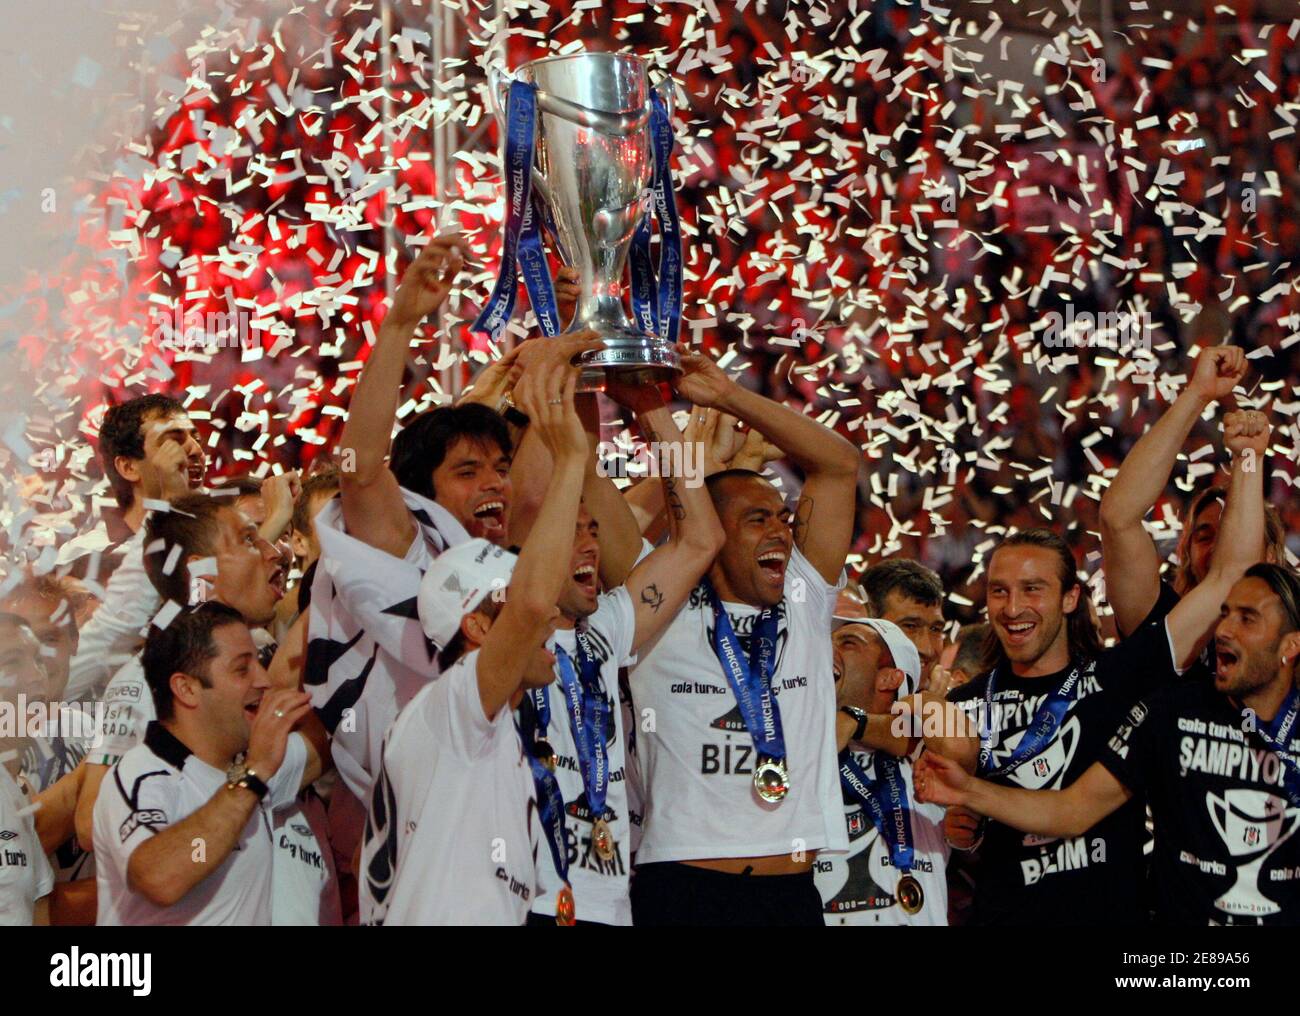 Besiktas players lift the Turkish Super League soccer championship trophy during a celebration at Inonu stadium in Istanbul May 31, 2009.REUTERS/Murad Sezer (TURKEY SPORT SOCCER) Stock Photo